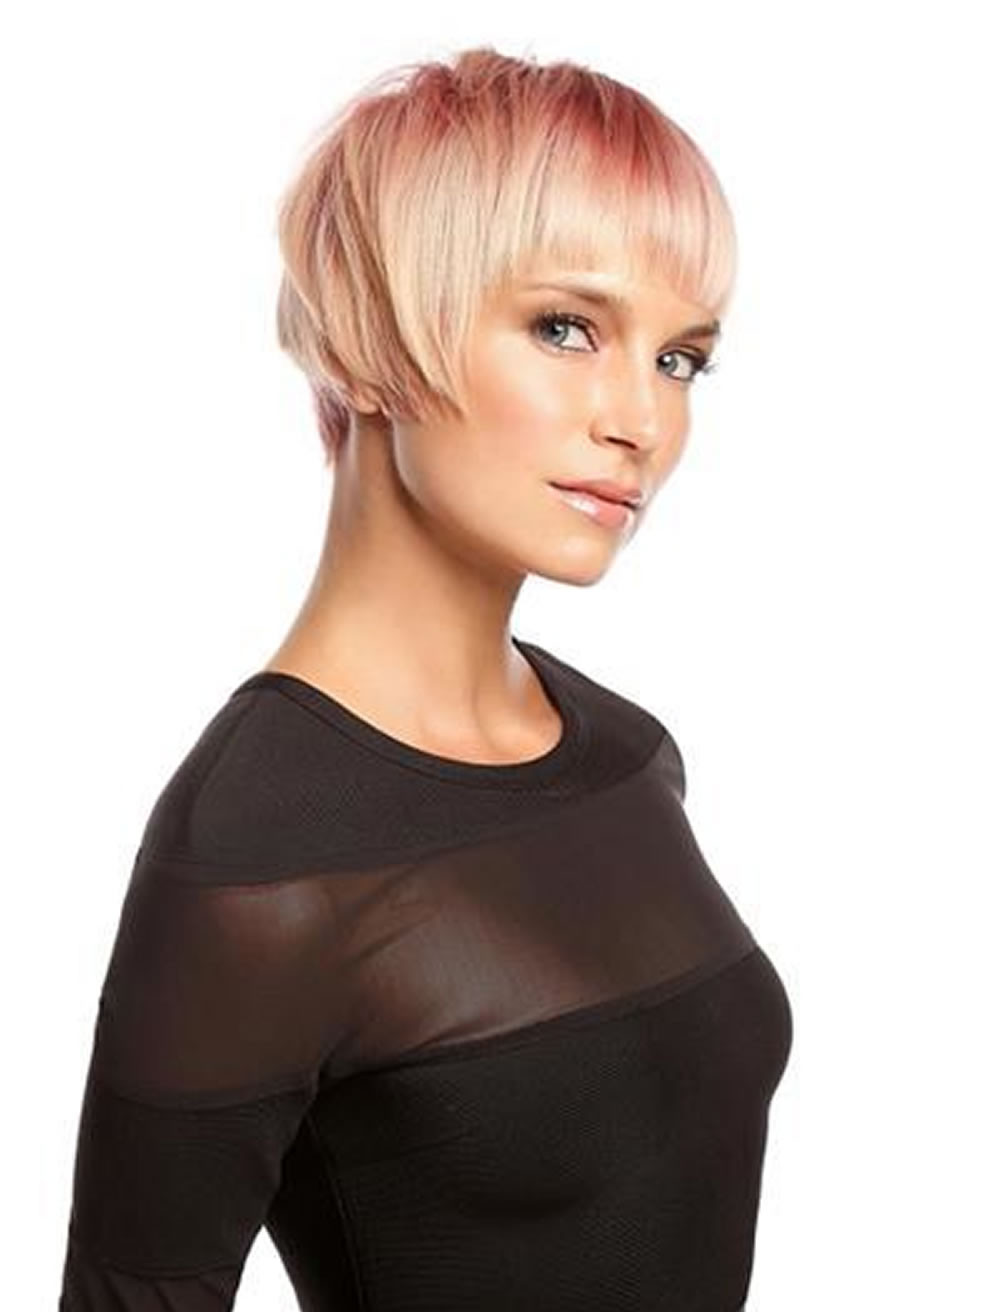 Short Hairstyles For Fine Hair 2020
 29 Long Short Bob Haircuts for Fine Hair 2019 2020 – Page